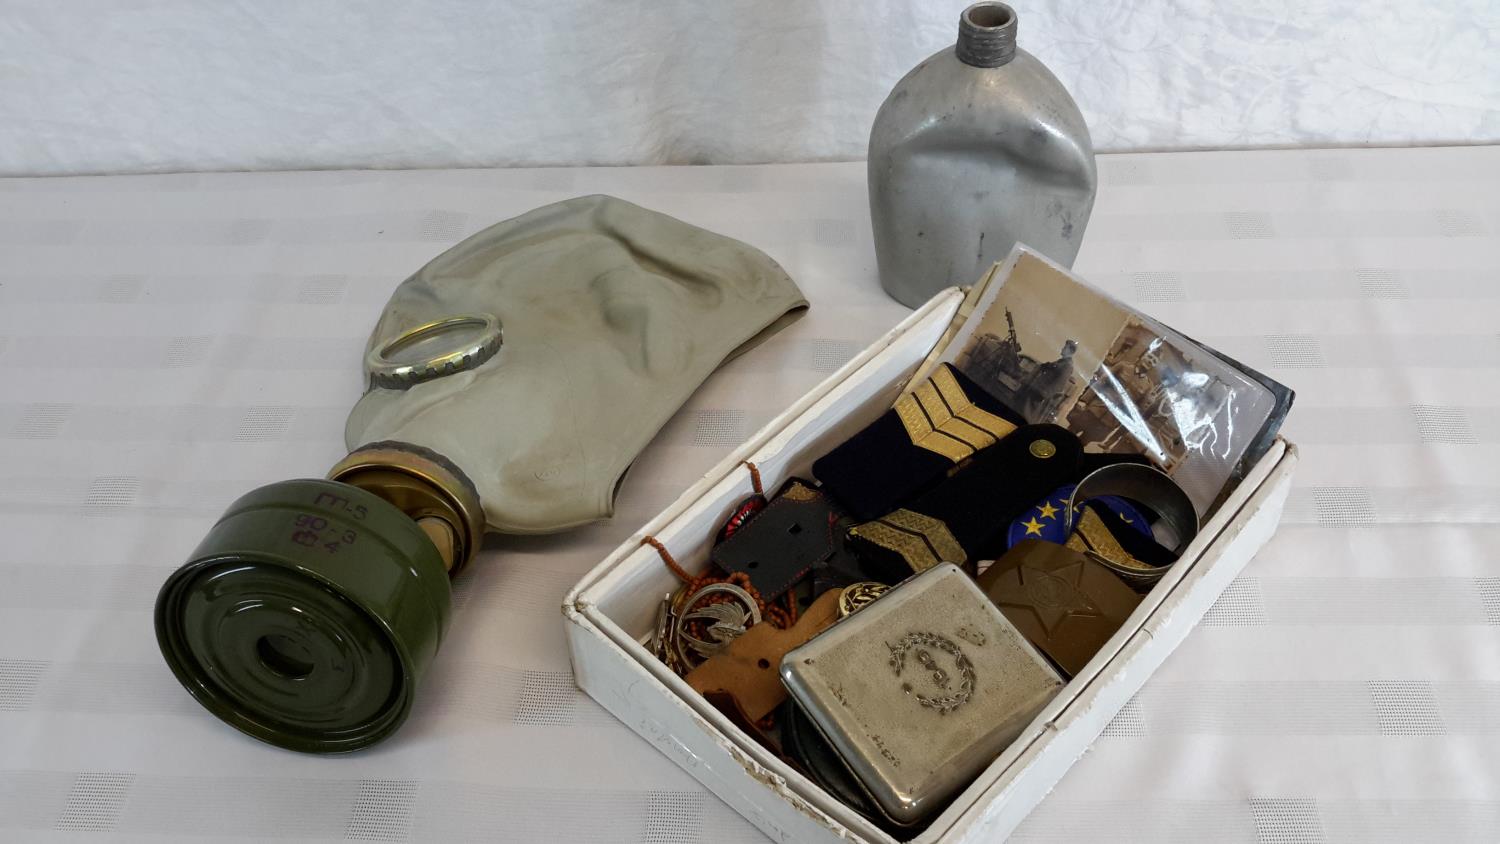 A collection of military badges, patches, gas mask & bottle